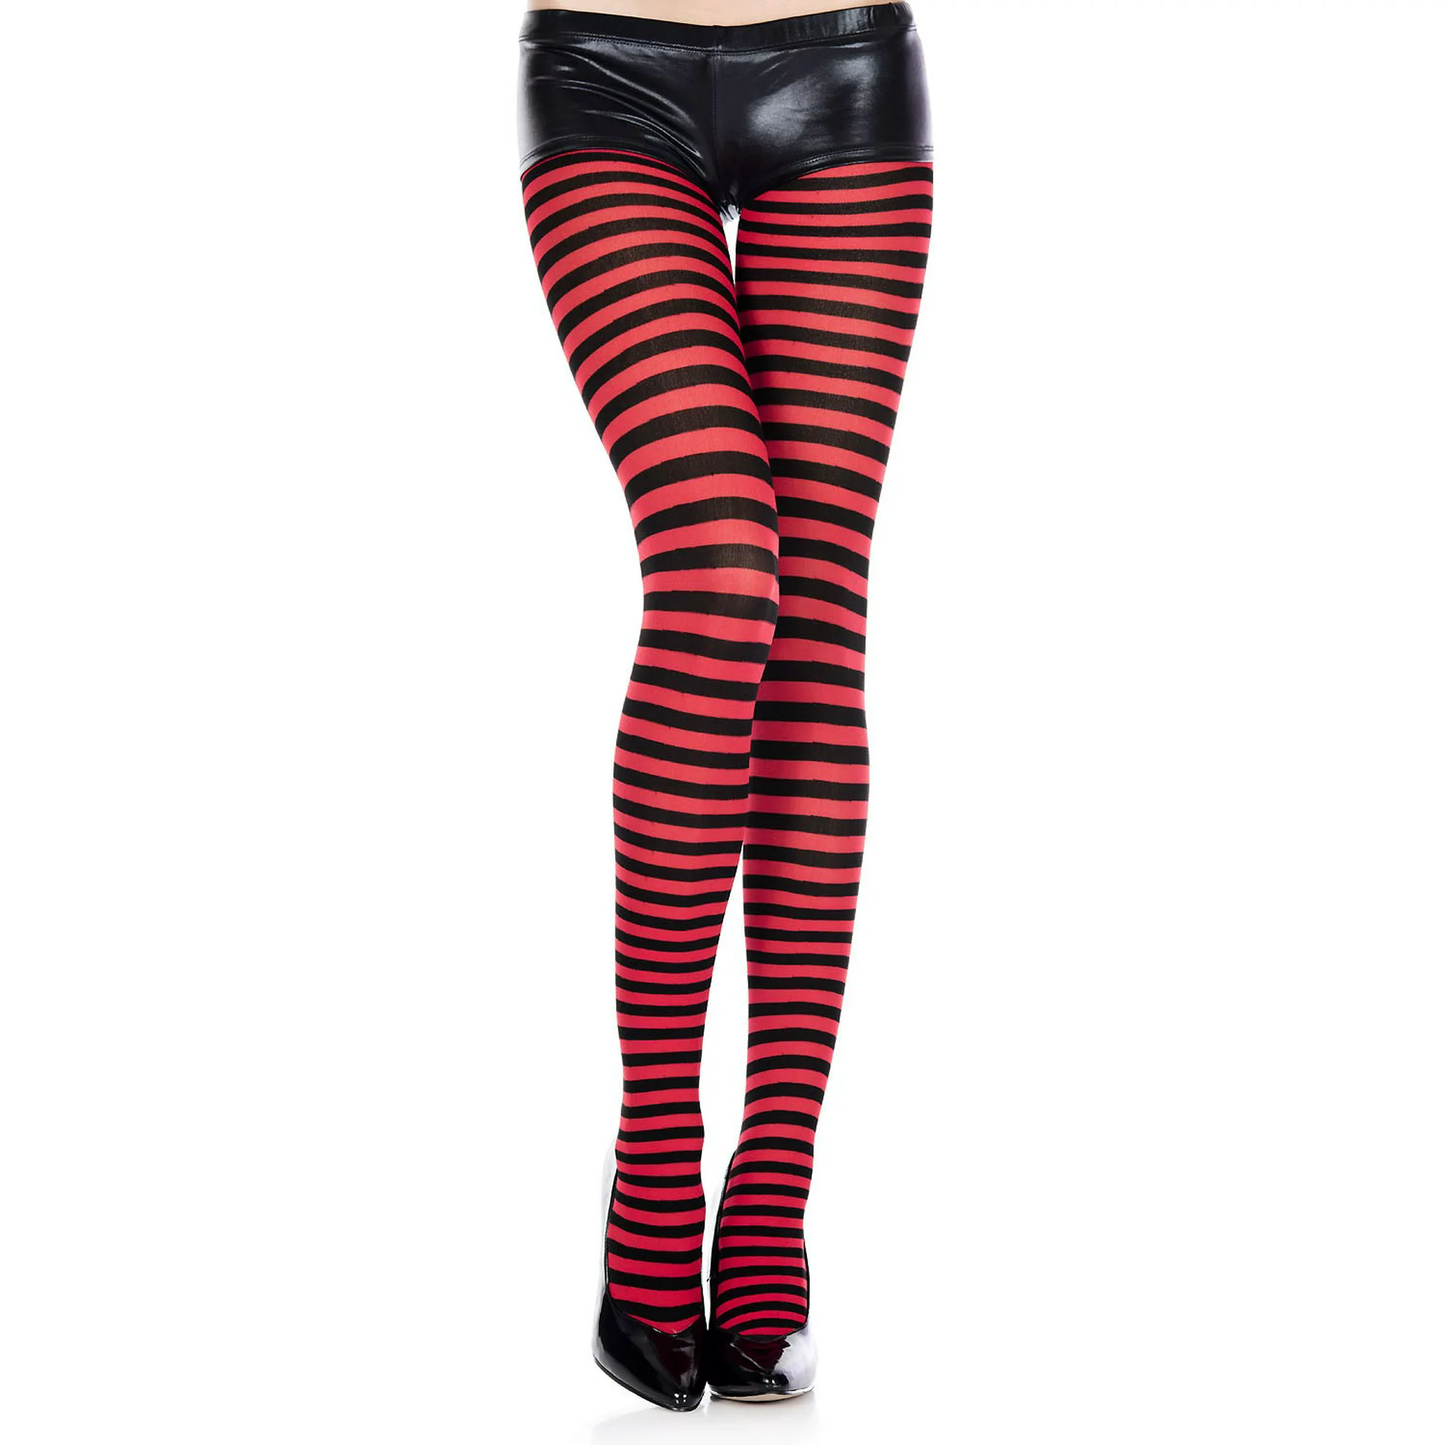 Red and Black Striped Tights